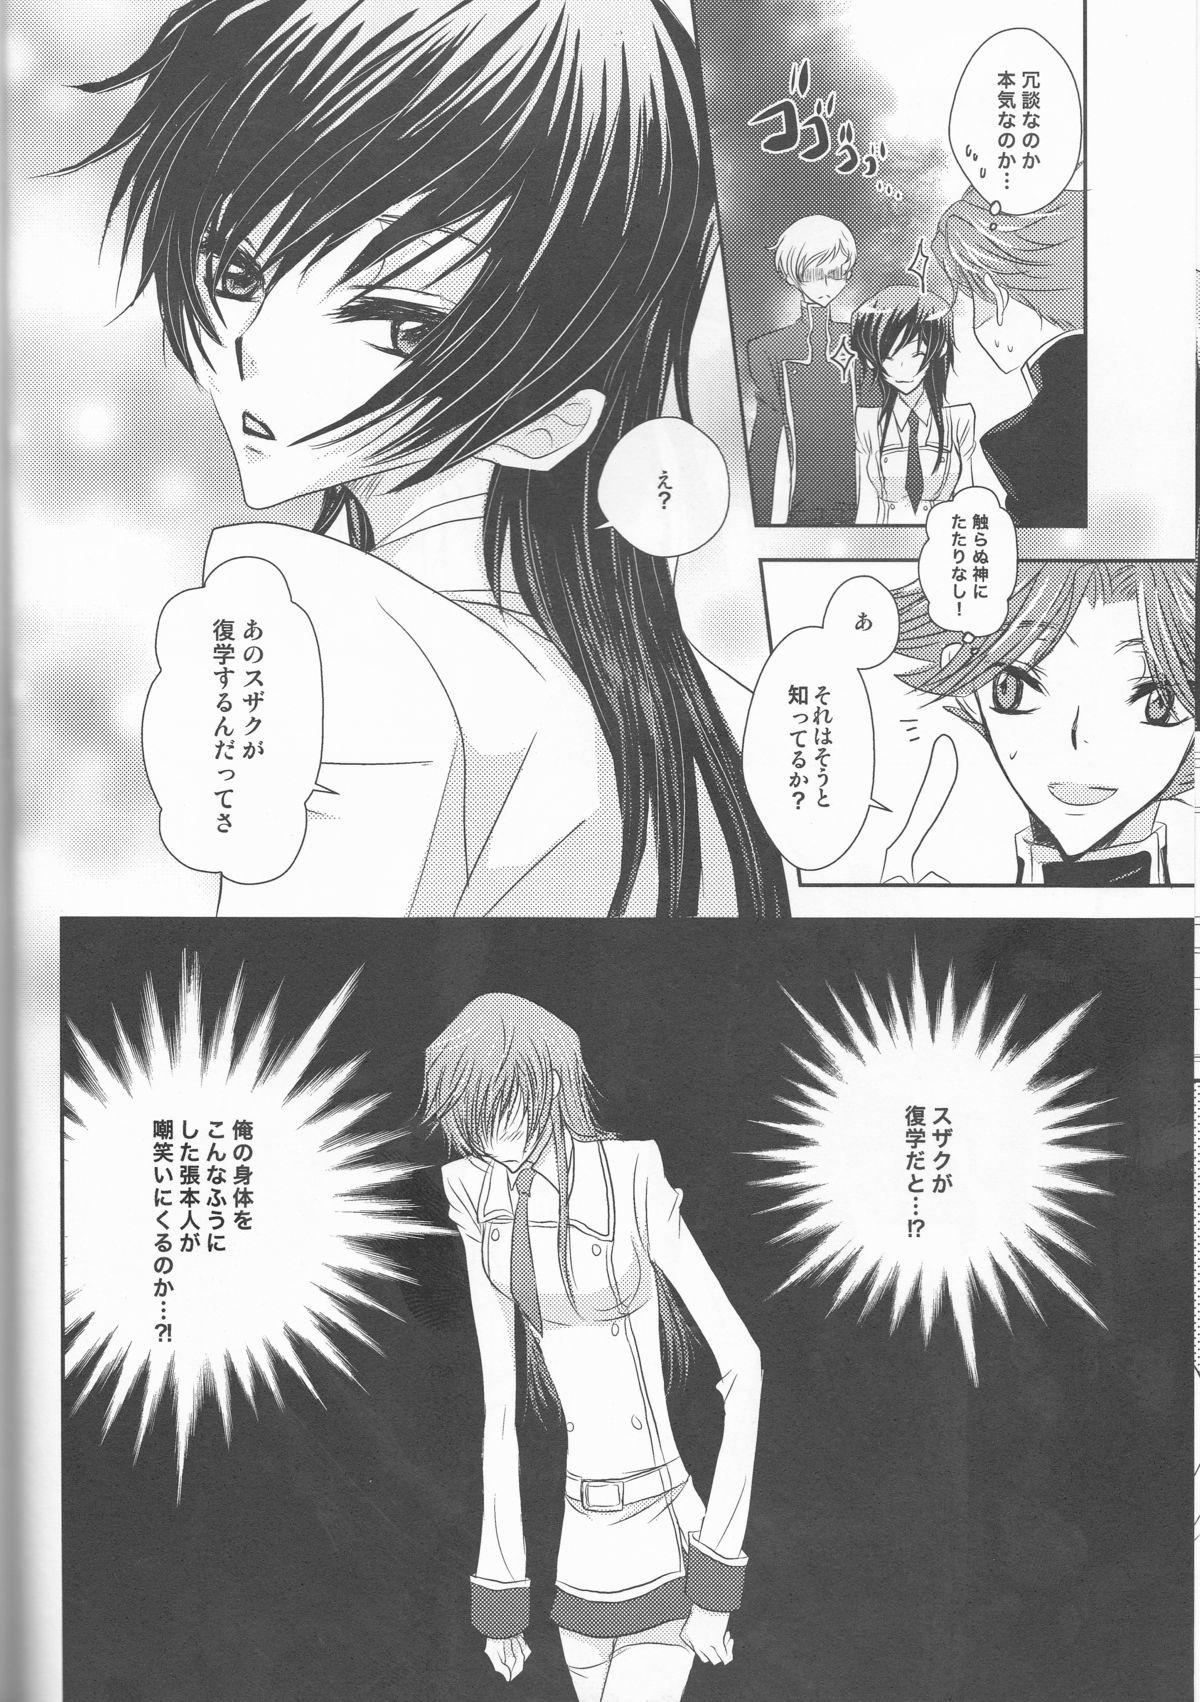 Swallowing Rainbow Gossip - Code geass Small Tits Porn - Page 9